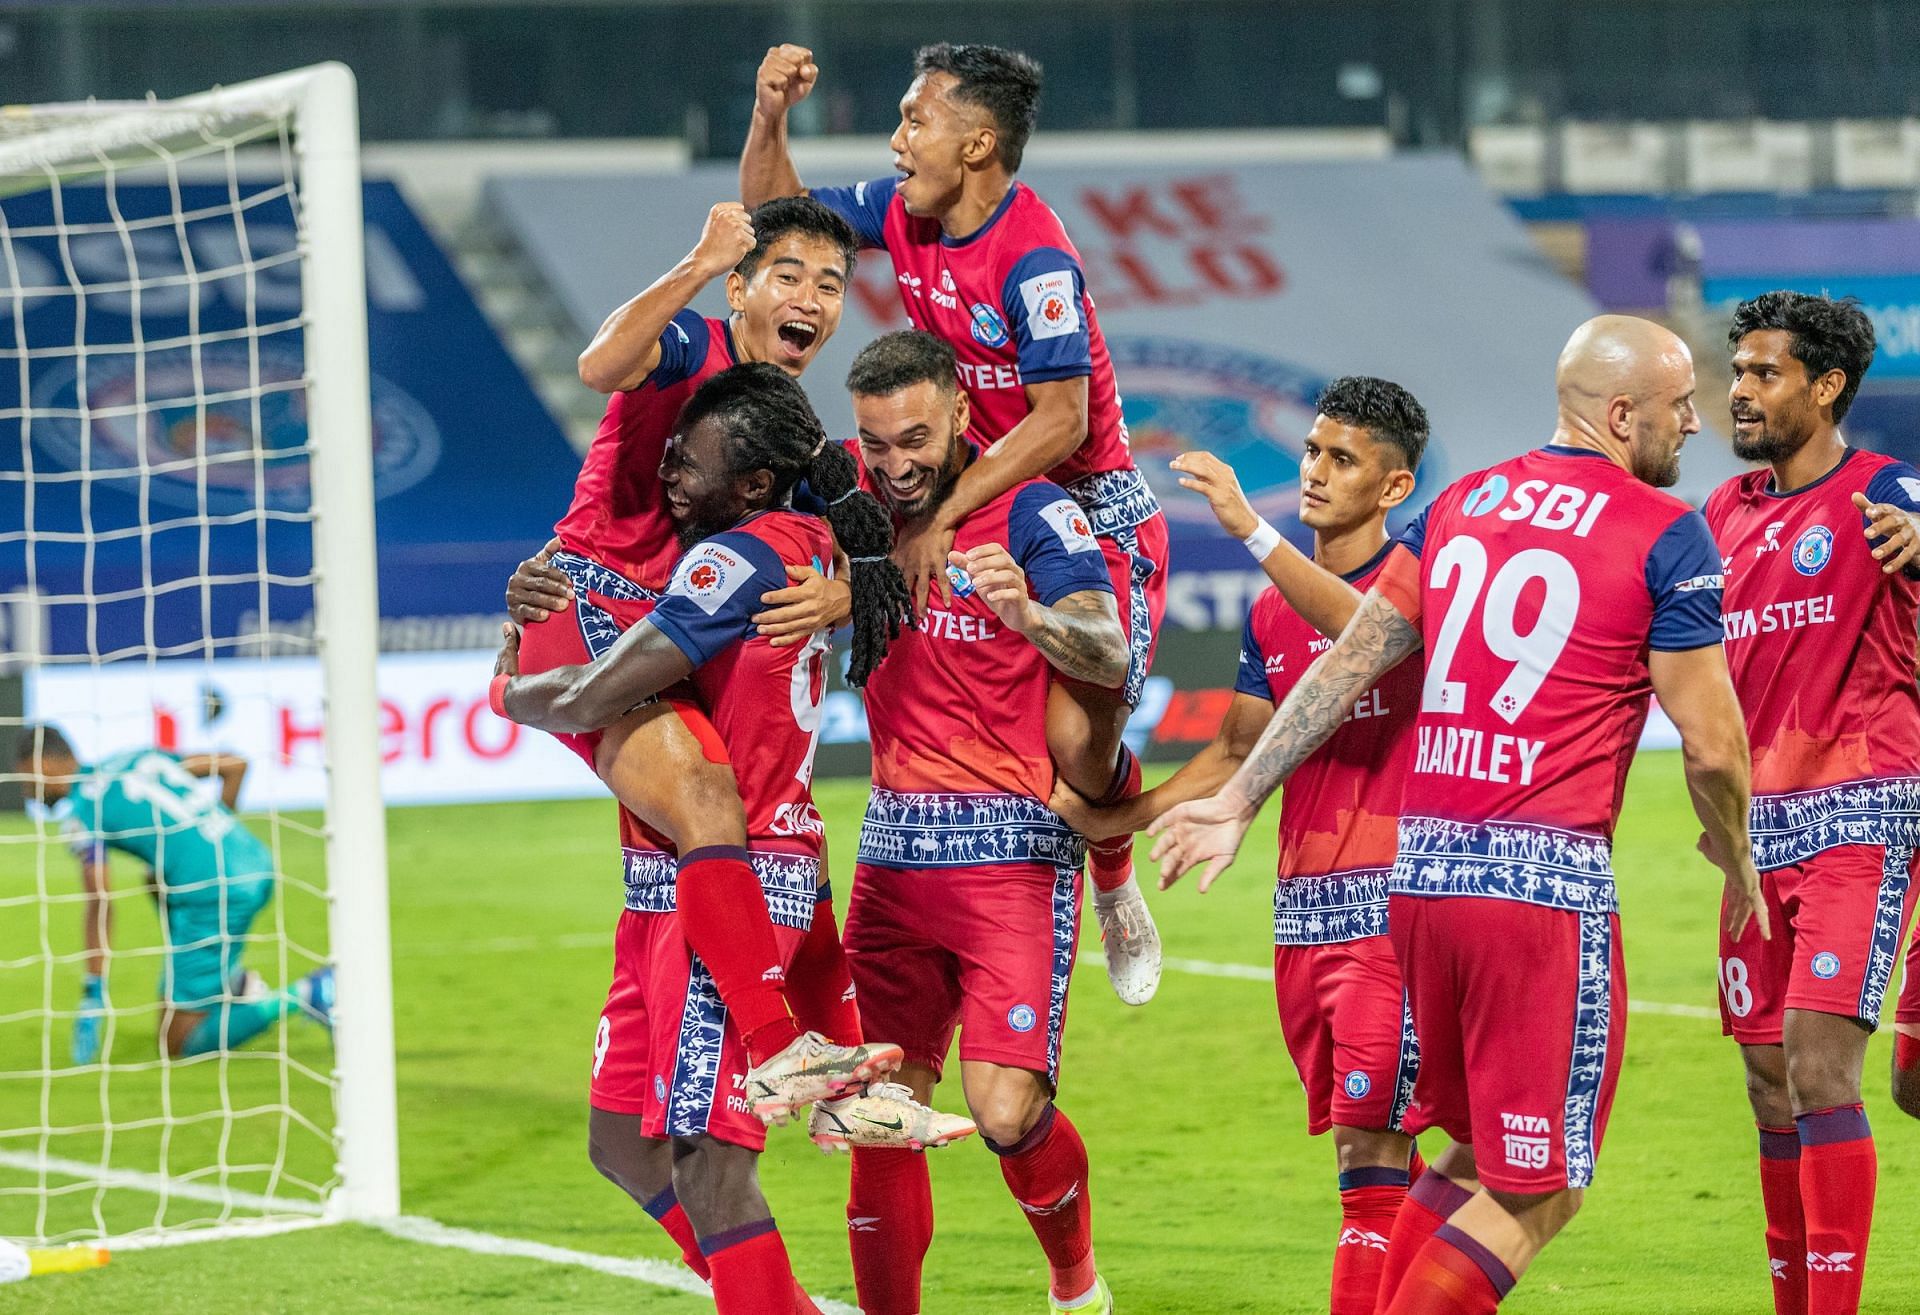 JFC players celebrate with Chima after he scored the third goal (Image courtesy: ISL media)